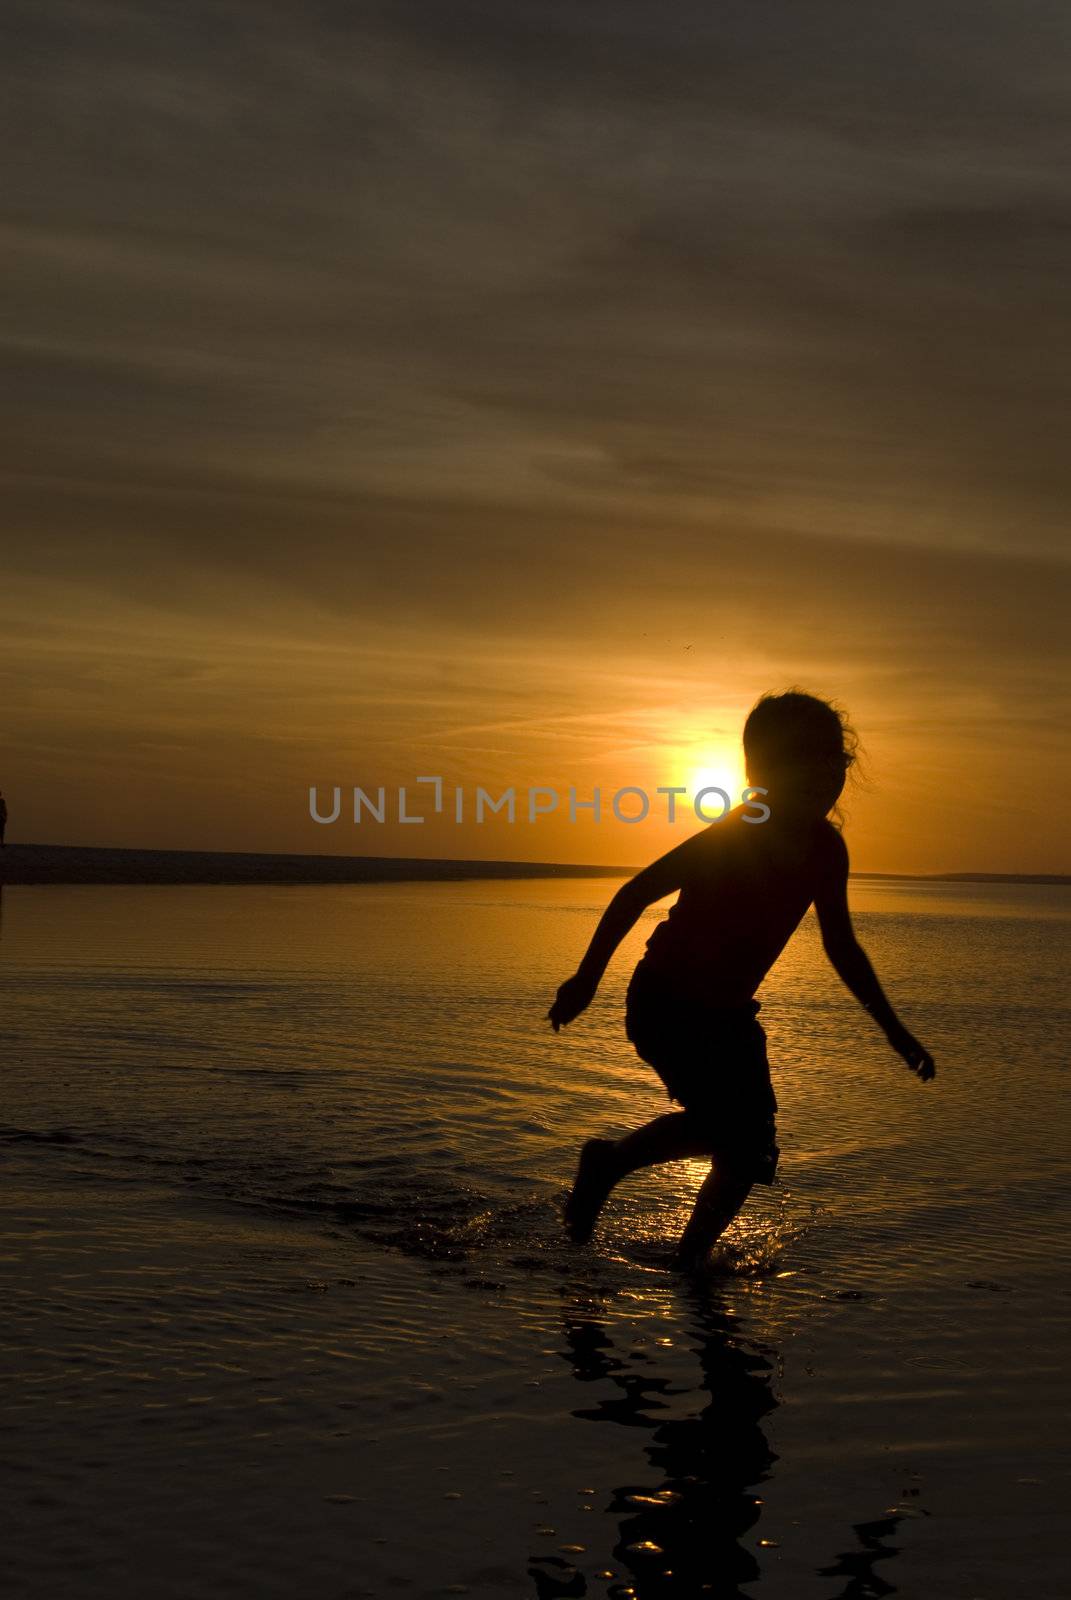 A young girl playing in a wading pool at the beach as the sun sets behind her